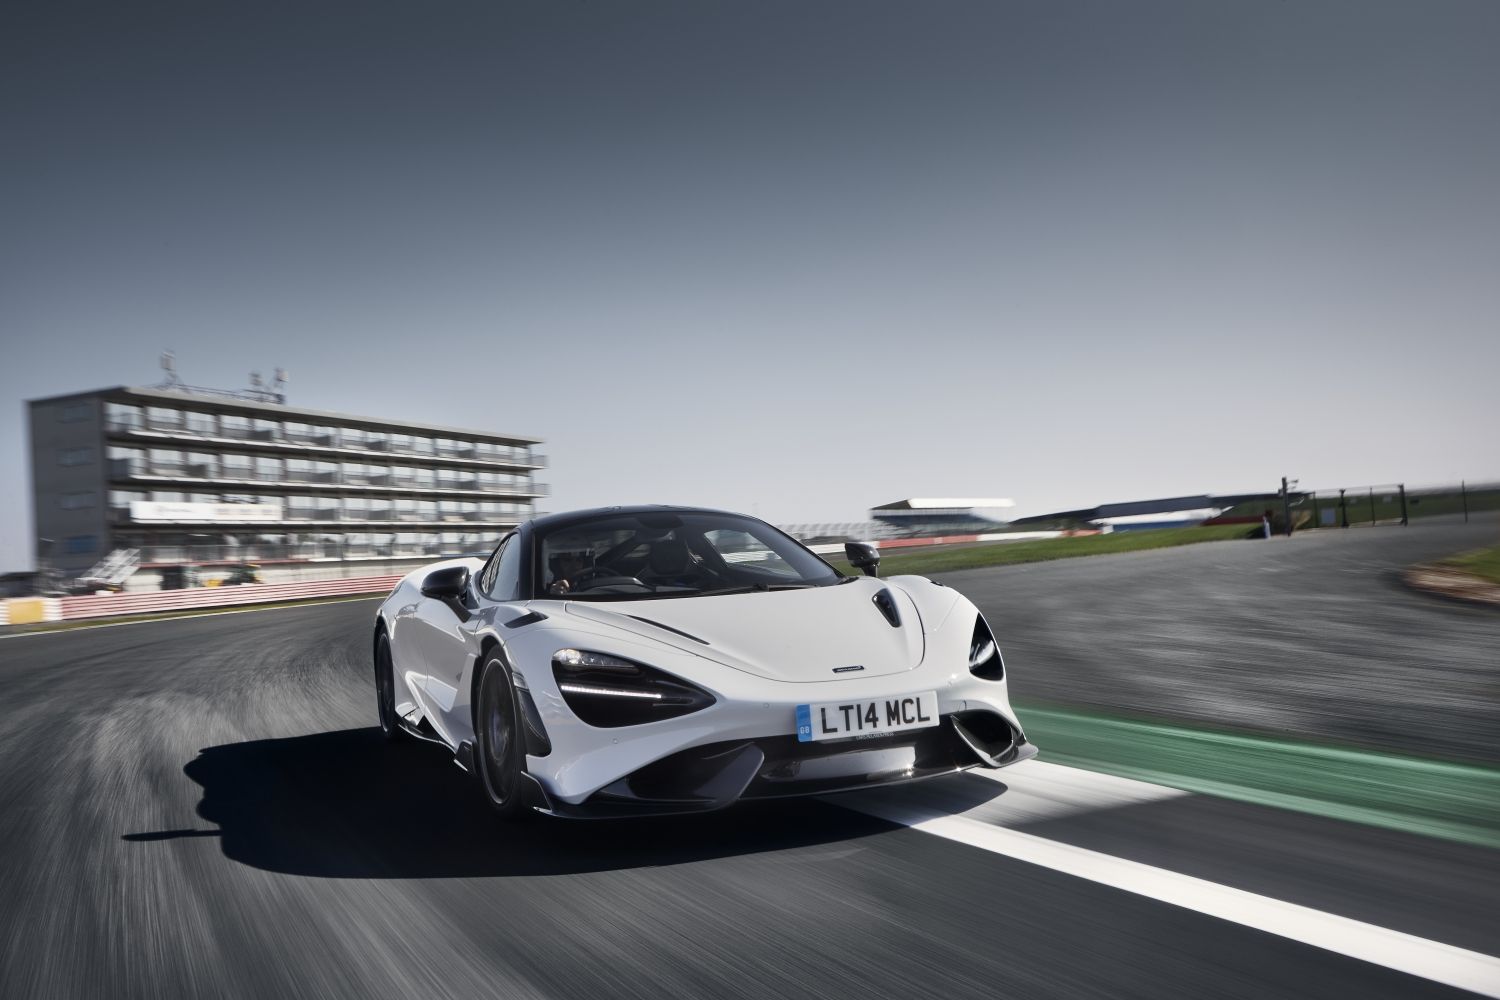 10 Facts About The McLaren 765LT That Every Enthusiast Should Know